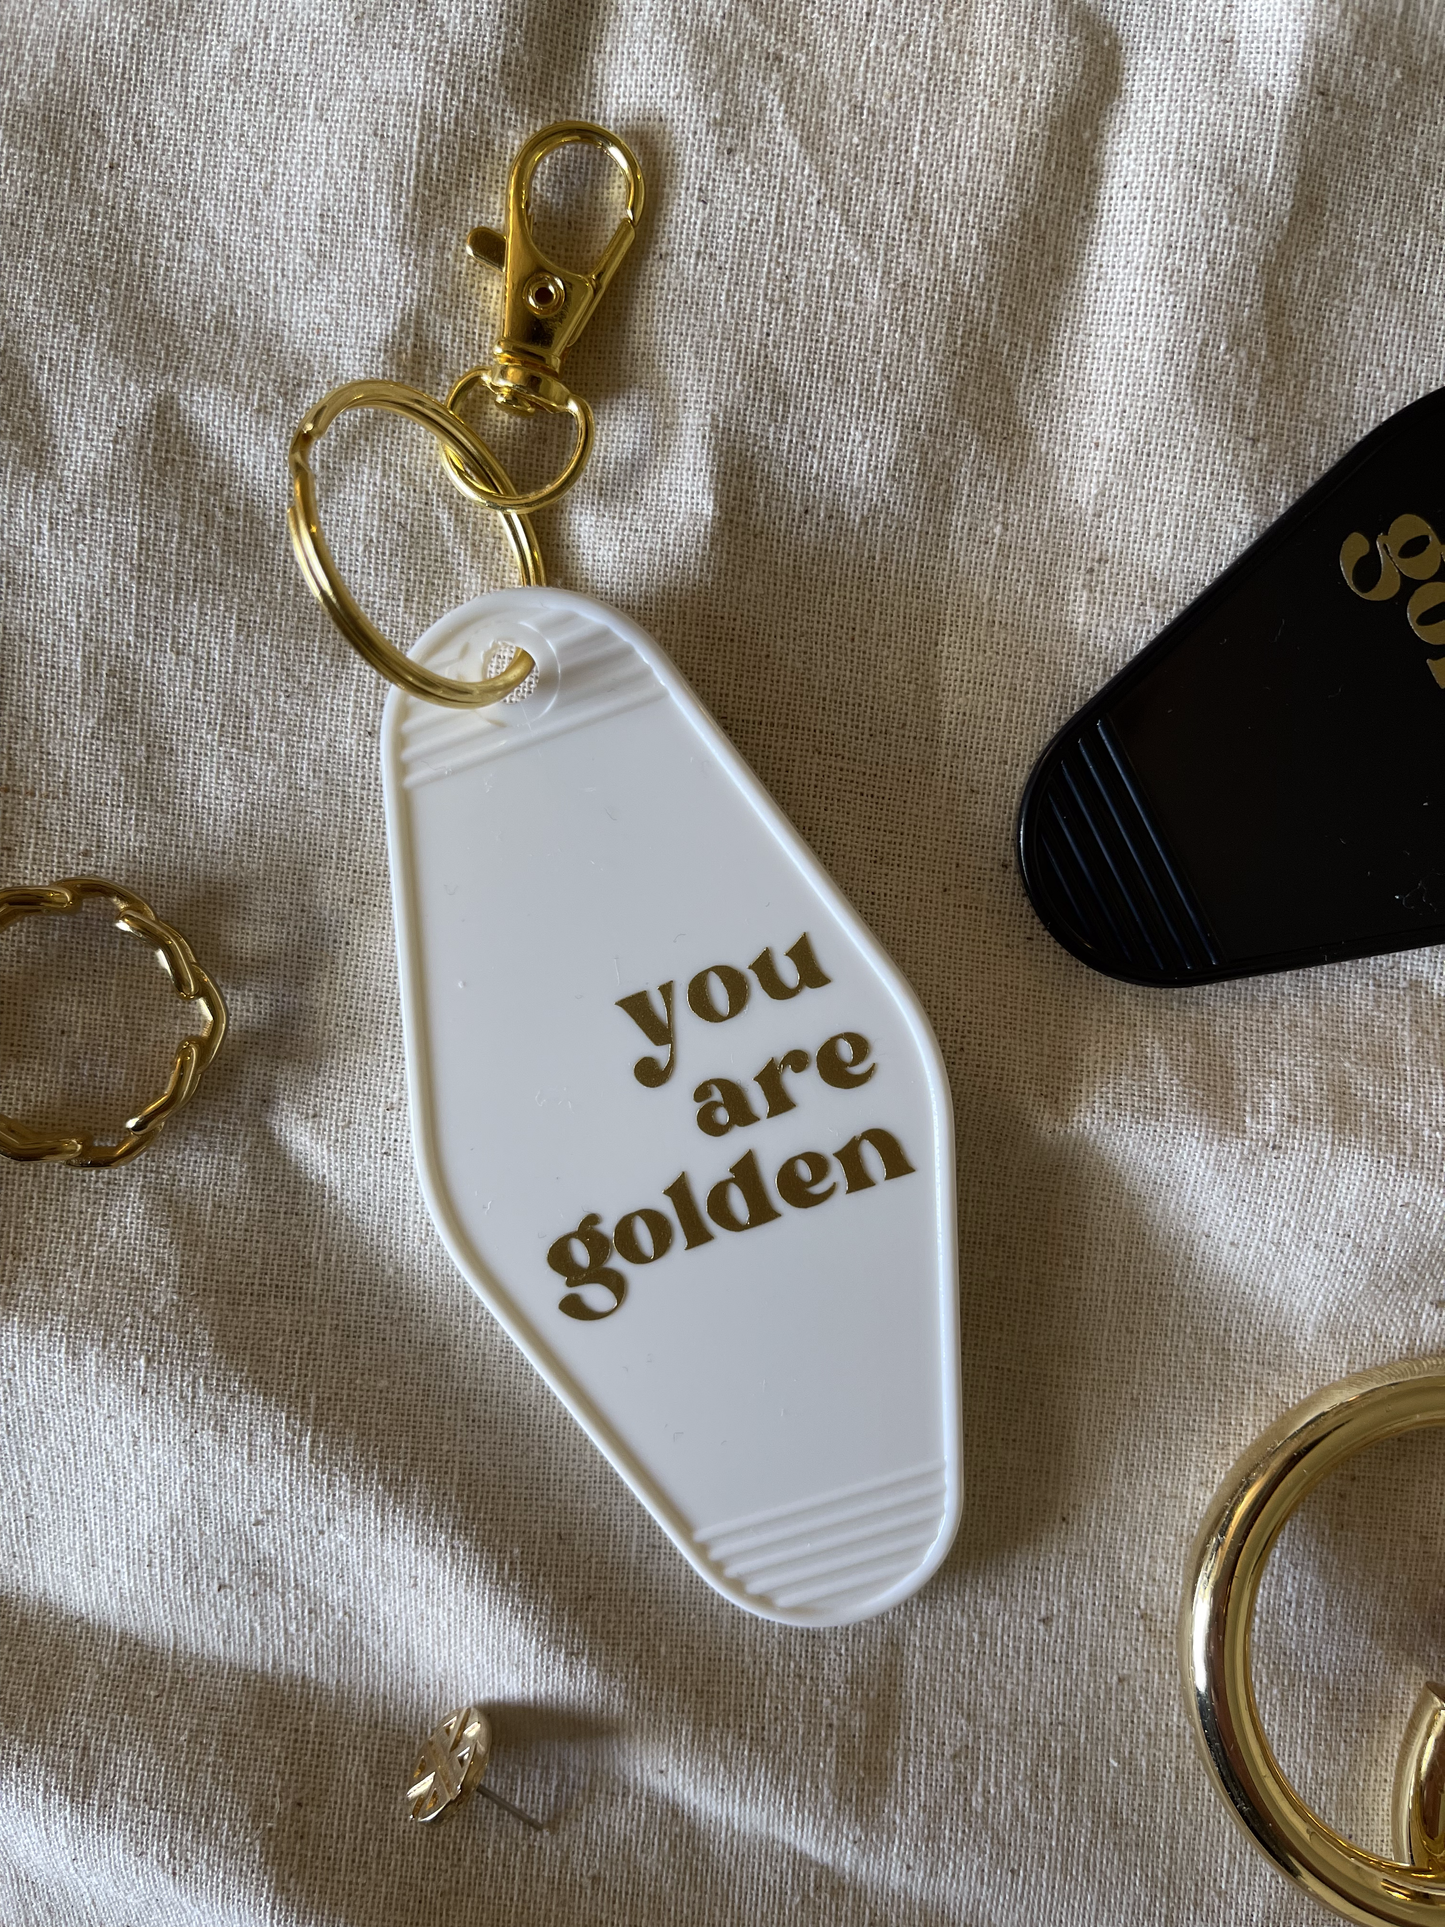 Vintage Motel Style Keychain - YOU ARE GOLDEN